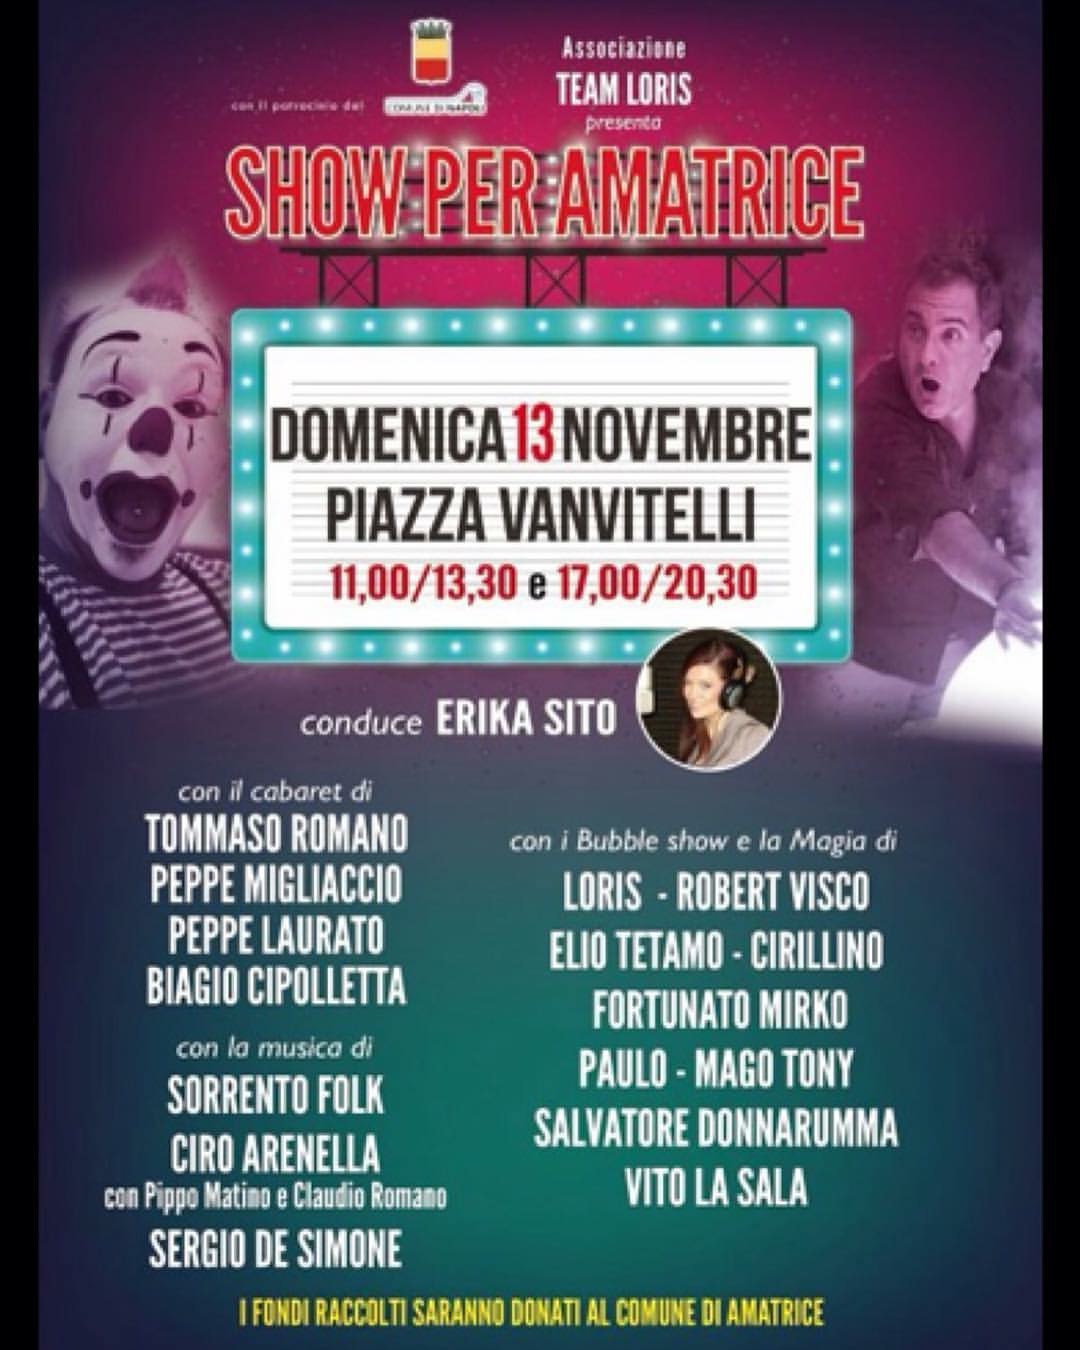 Show for Amatrice